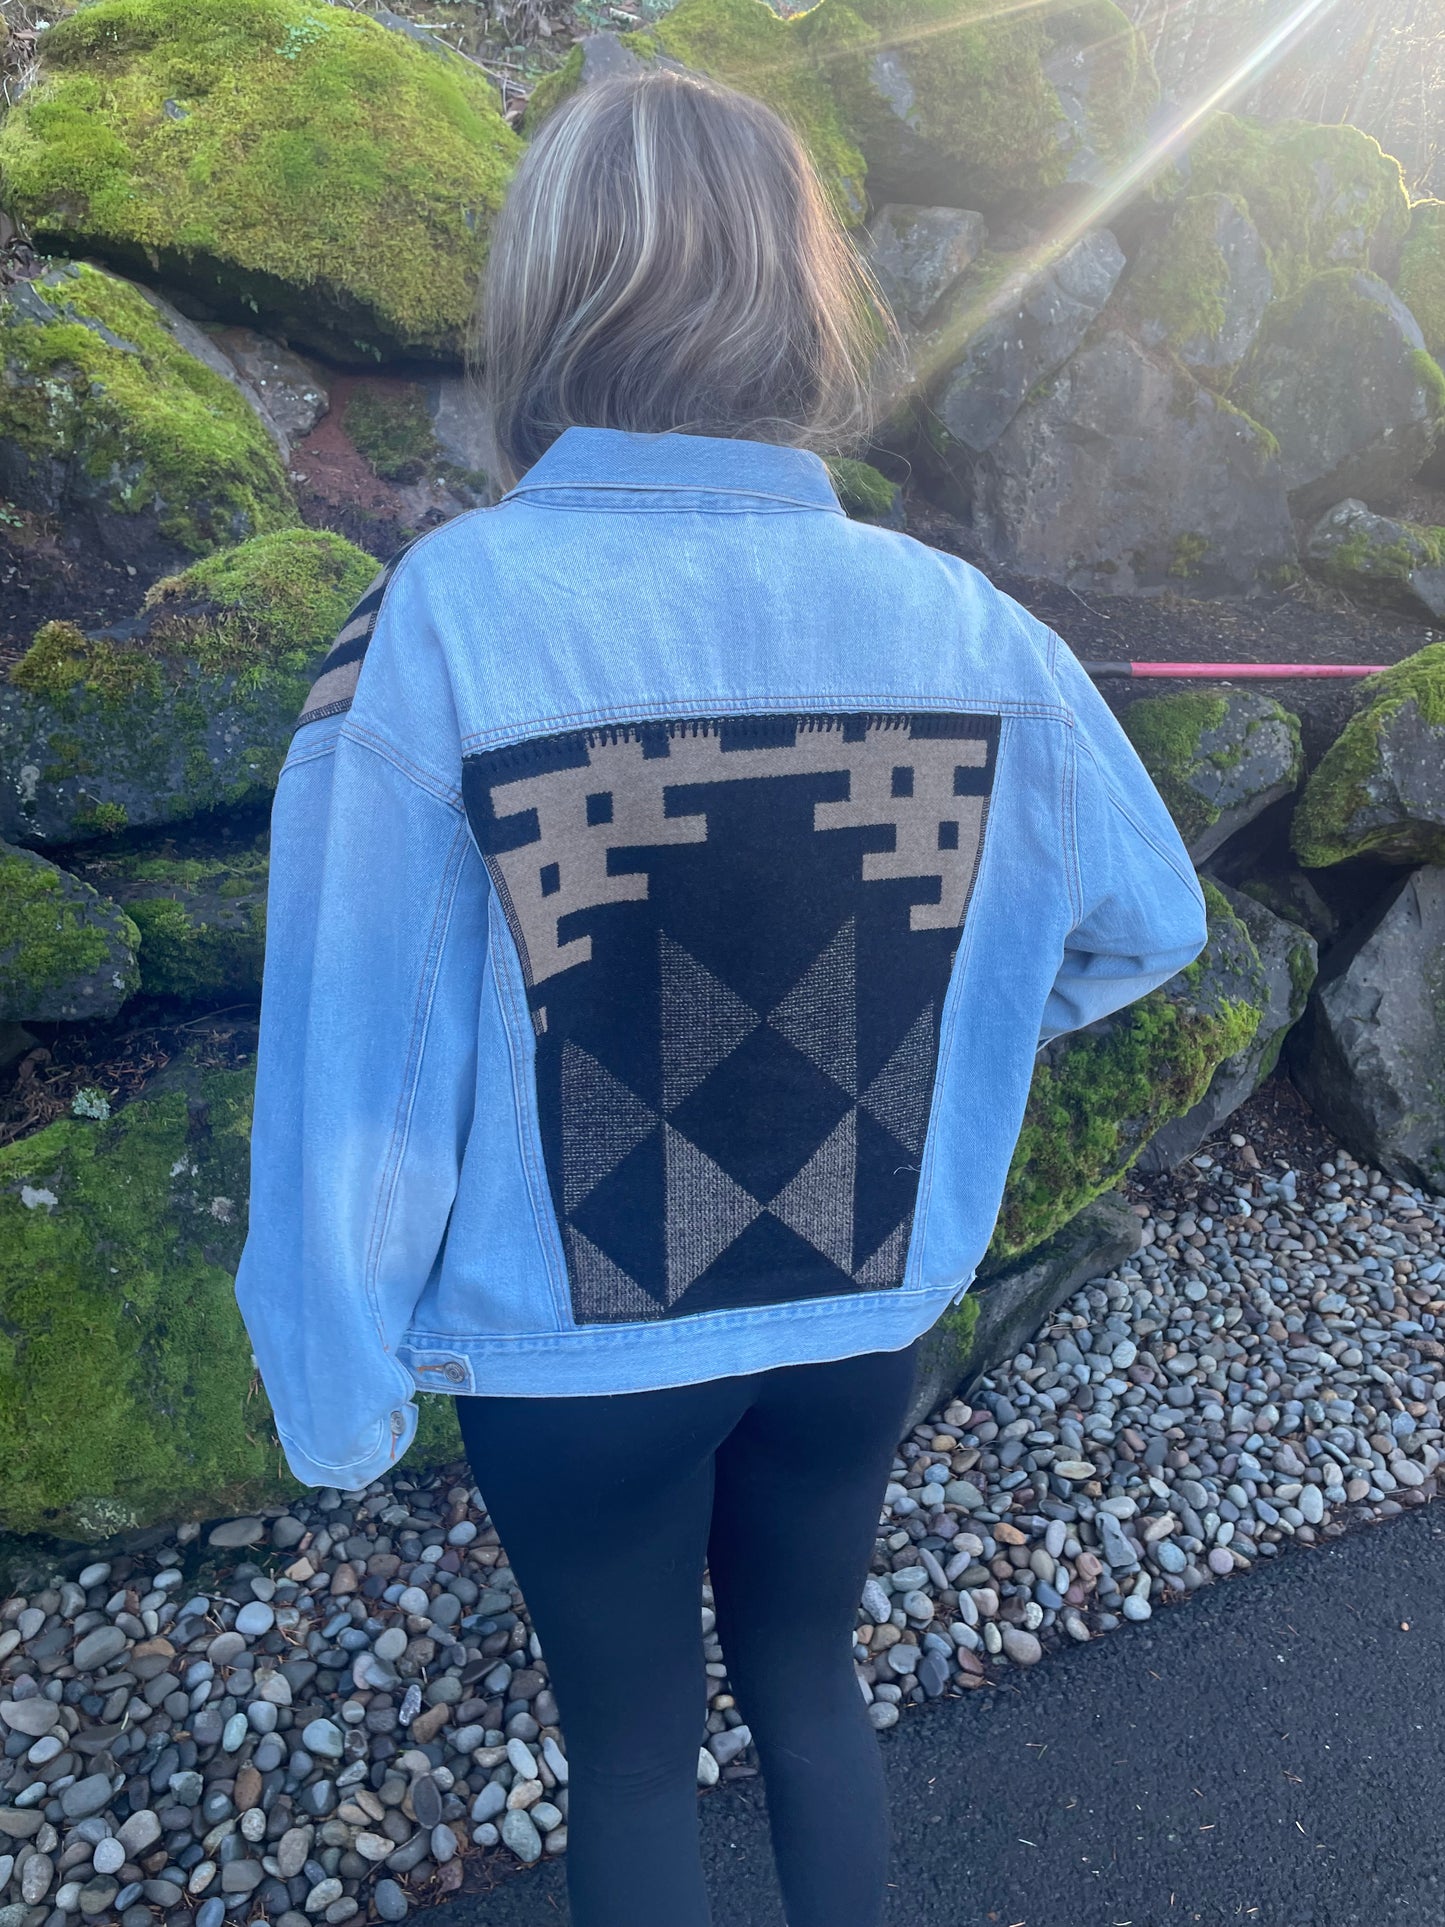 Denim Jacket with Pendleton Wool Accents